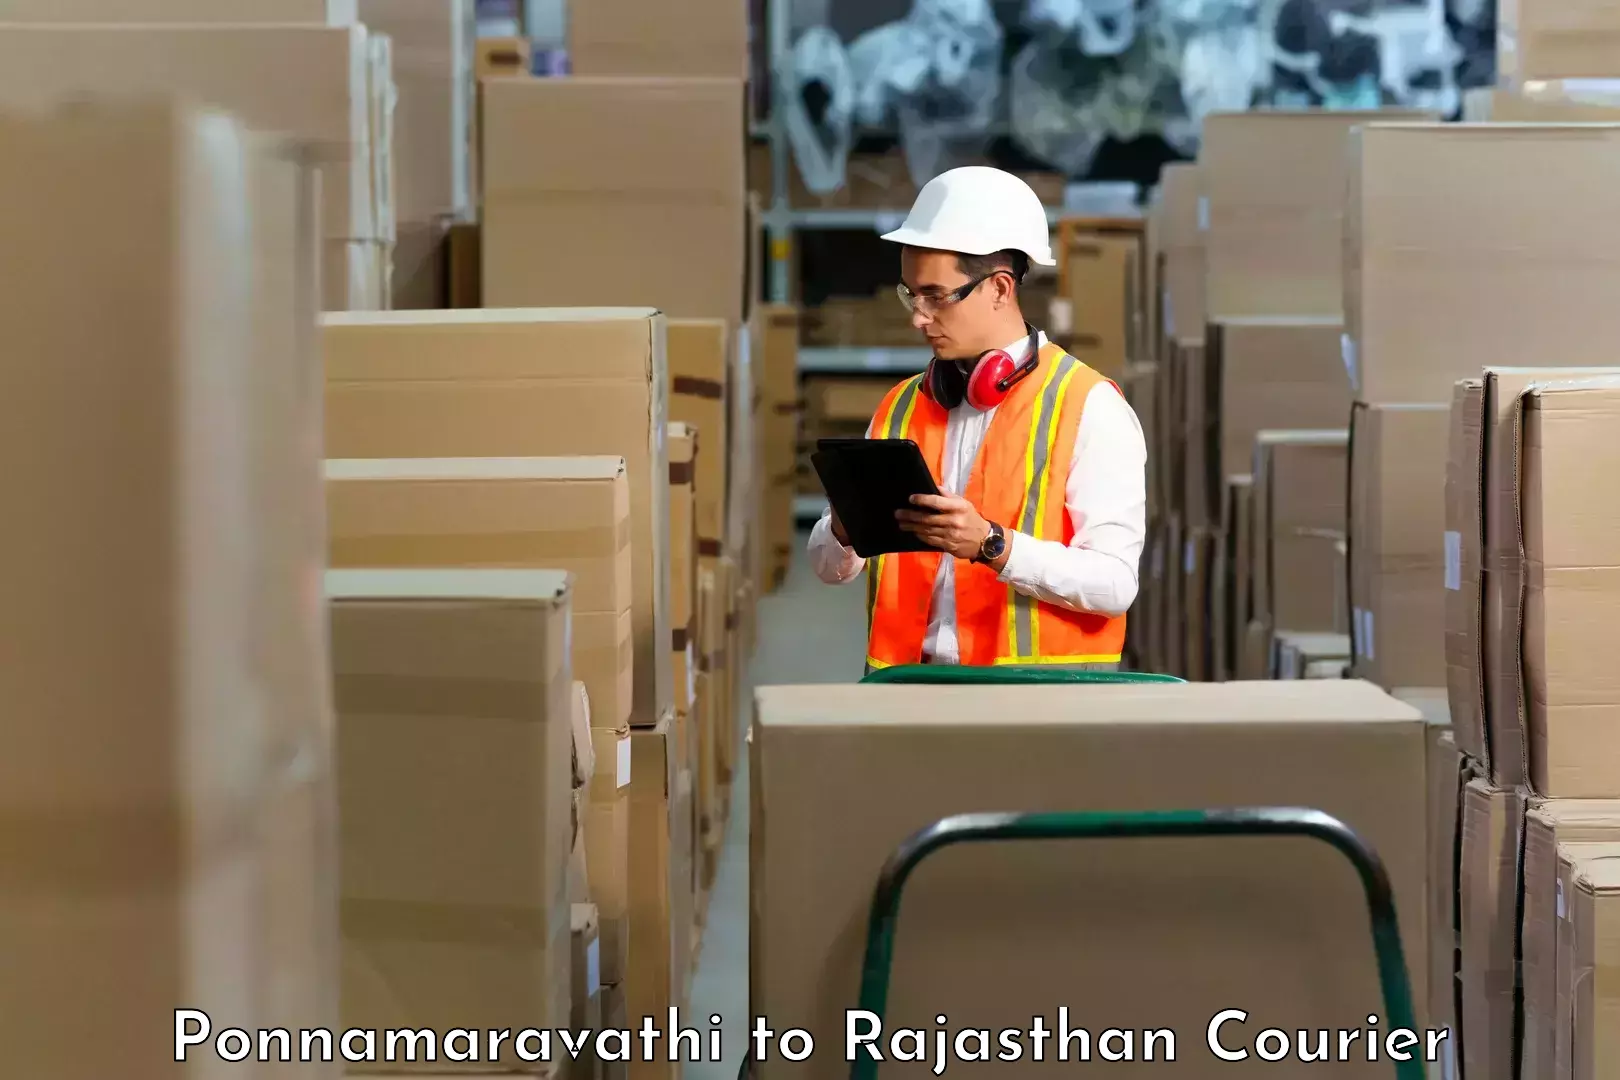 User-friendly delivery service Ponnamaravathi to Rajasthan